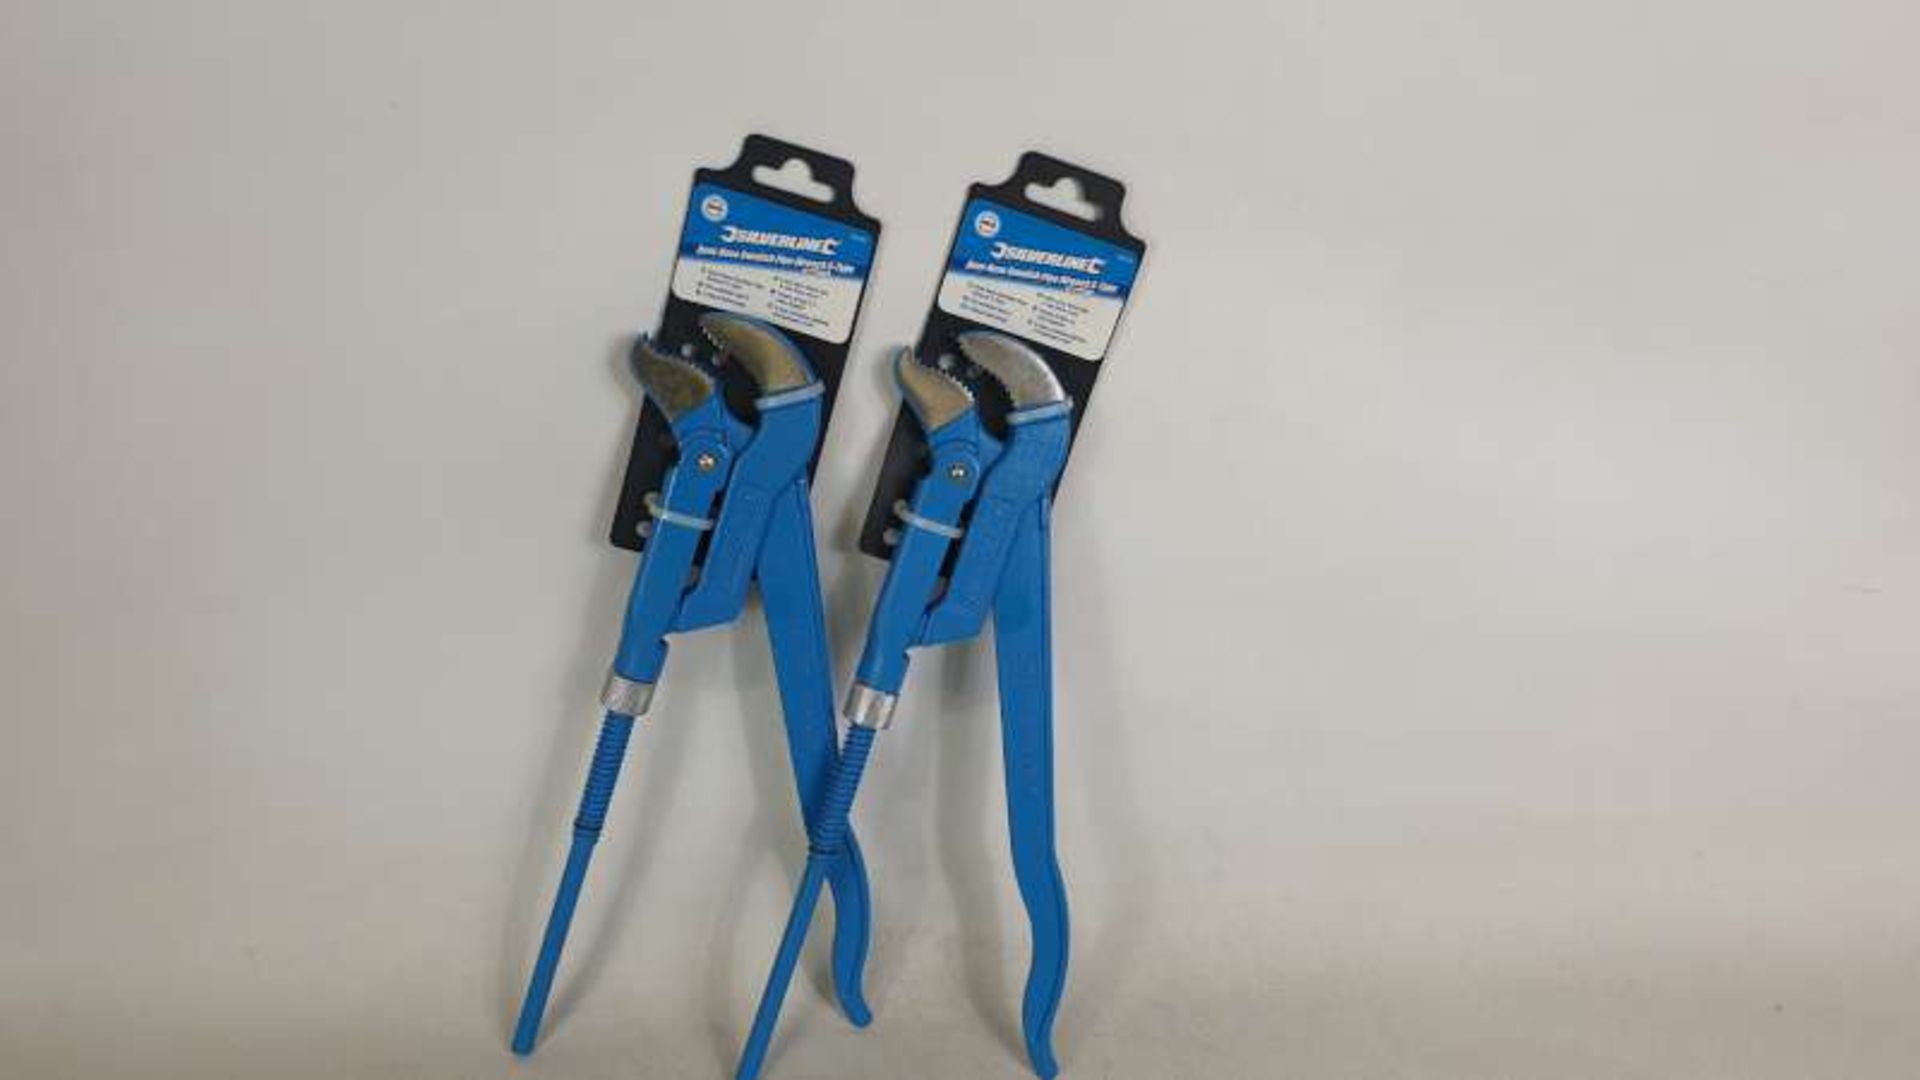 12 X BRAND NEW SILVERLINE BENT NOSE SWEDISH PIPE WRENCH S-TYPE 25MM